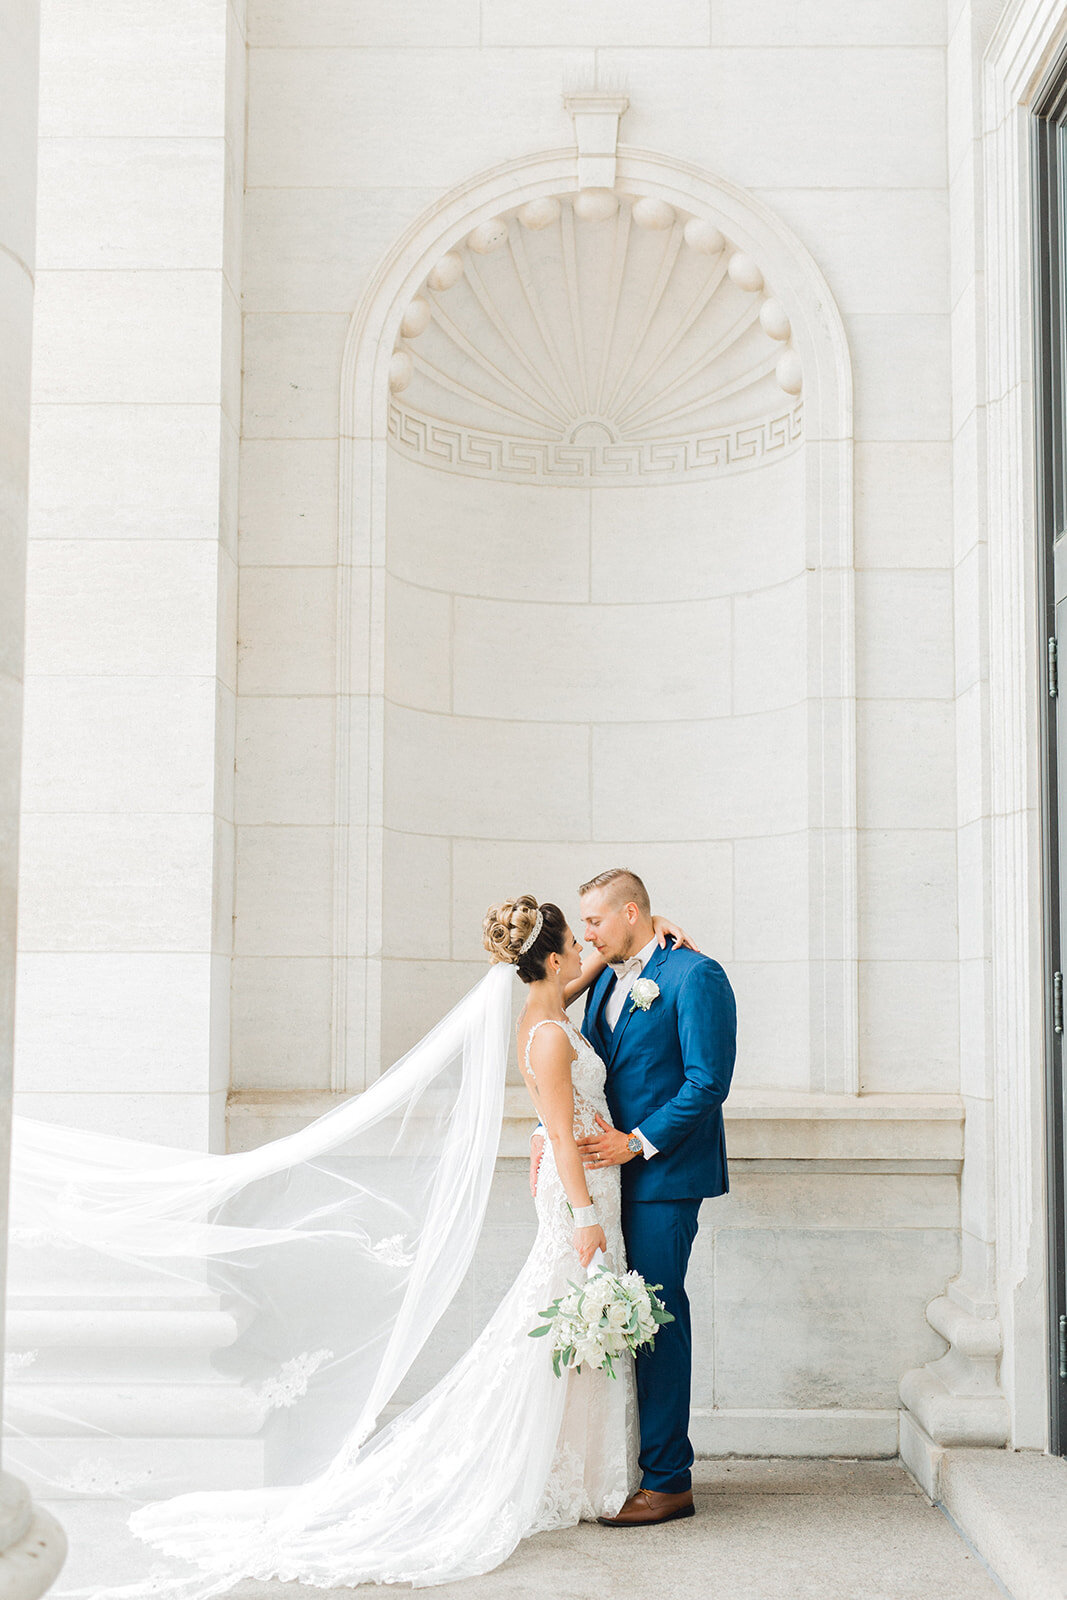 Shattering-Silence-Des-Moines-Wedding-Kamila+Mitch-5743